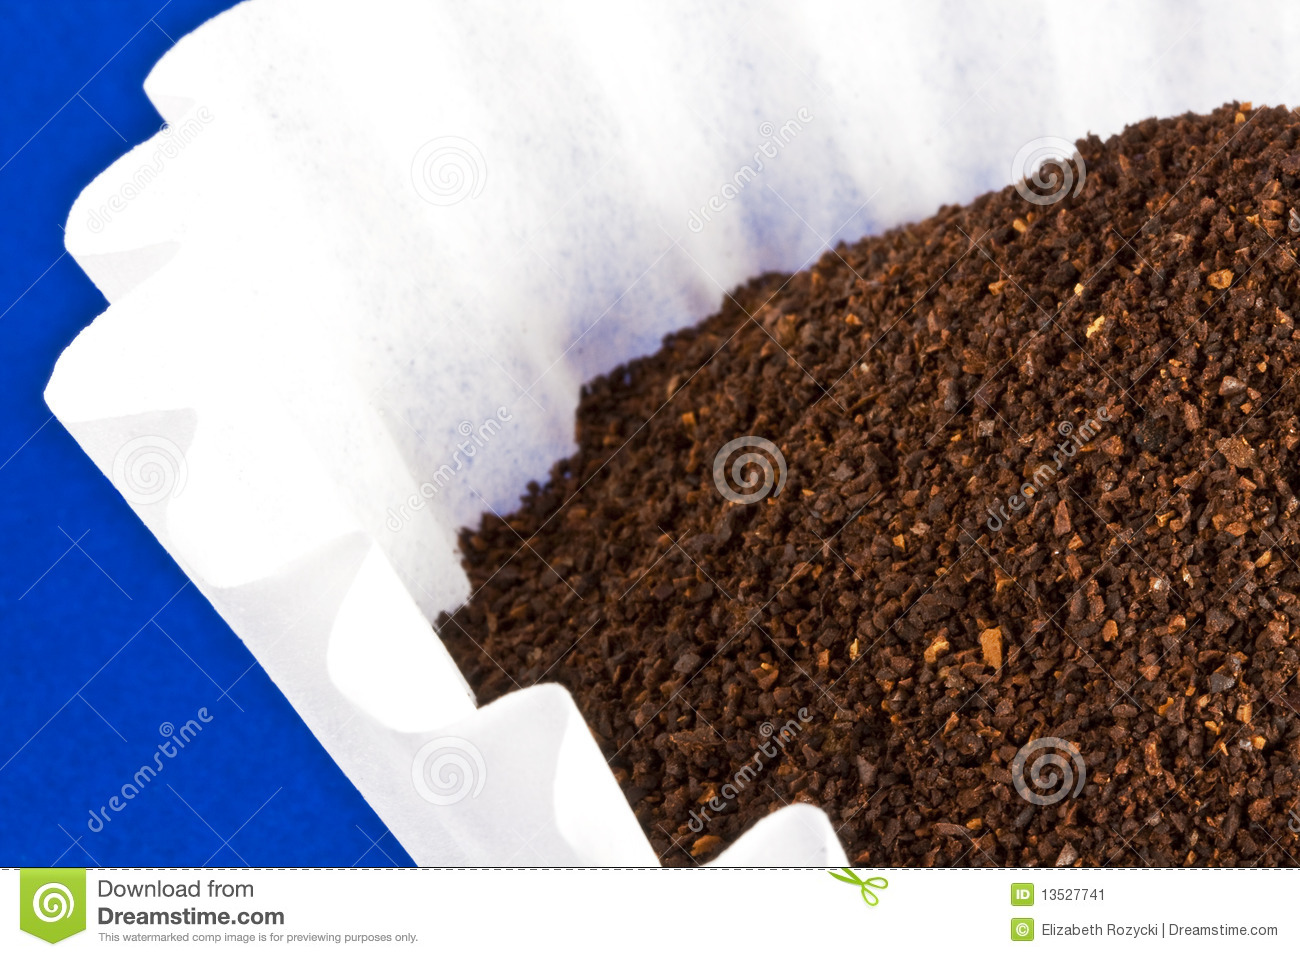 Pile Of Coffee Grounds Sits In A White Filter On Top Of Blue